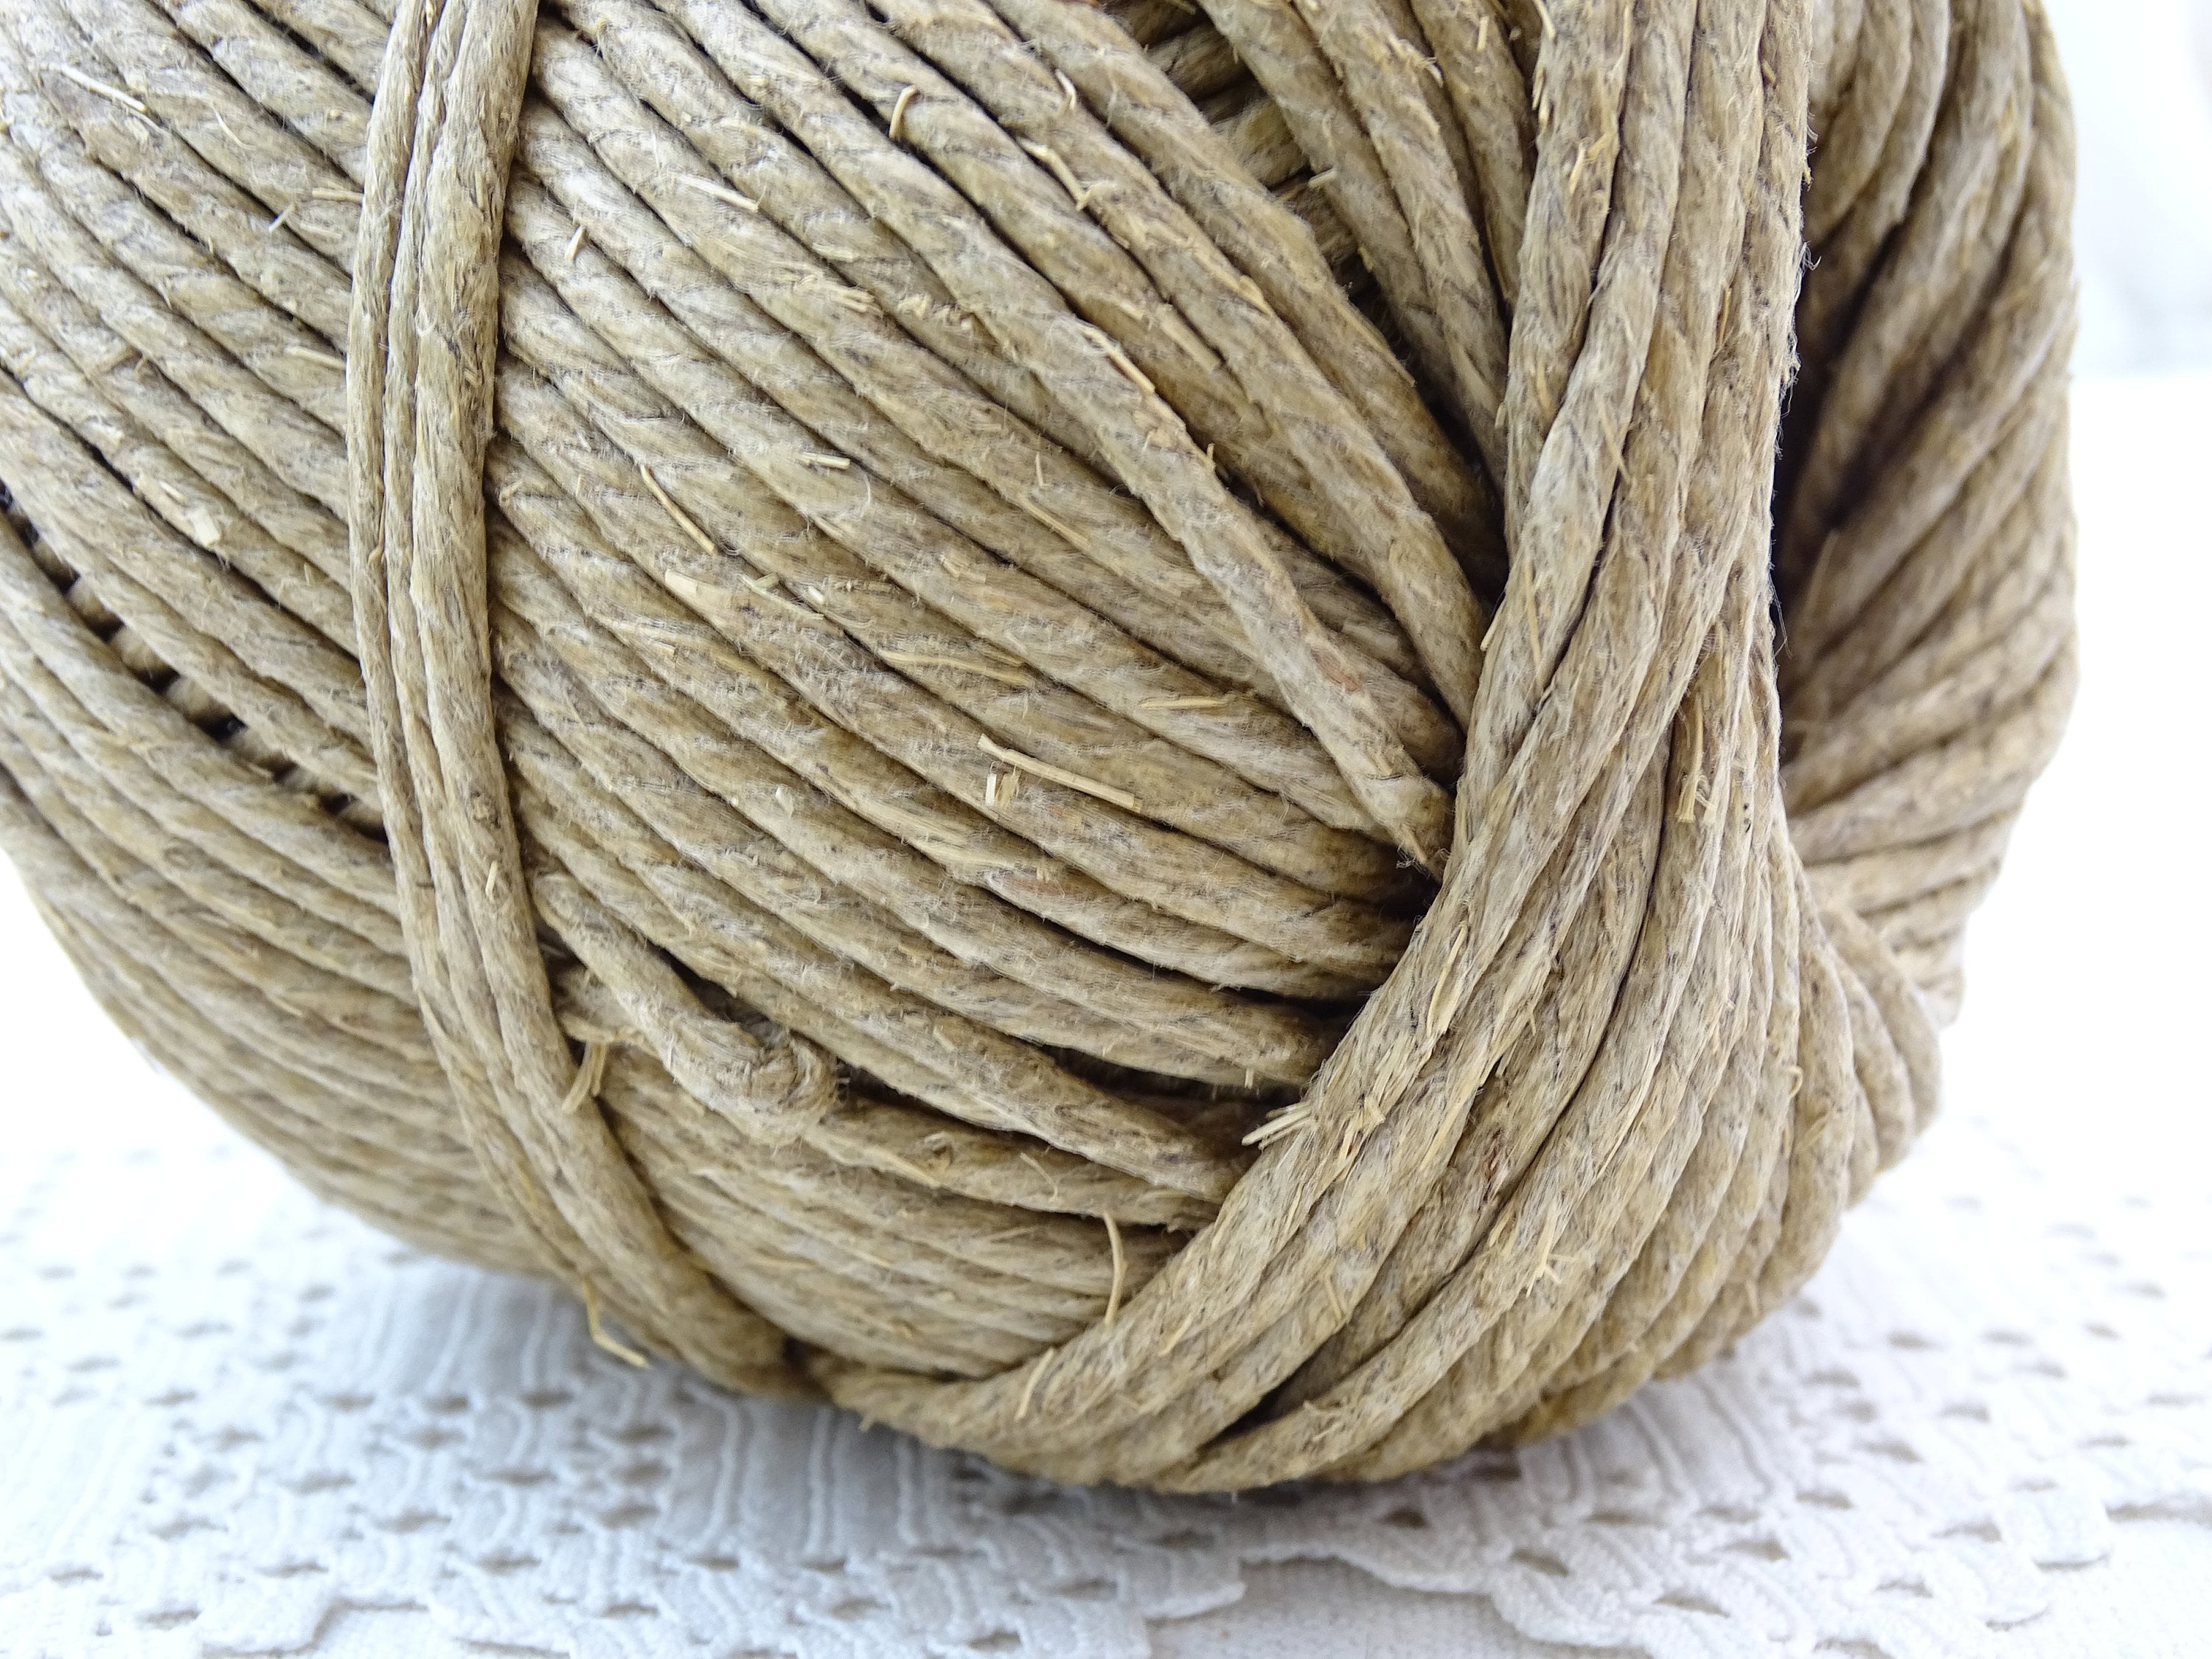 Large Ball of Vintage French Natural Twine, Retro Thick Cord From France,  Old Style String, Country Rustic Rural DIY Rope Craft Accessory 